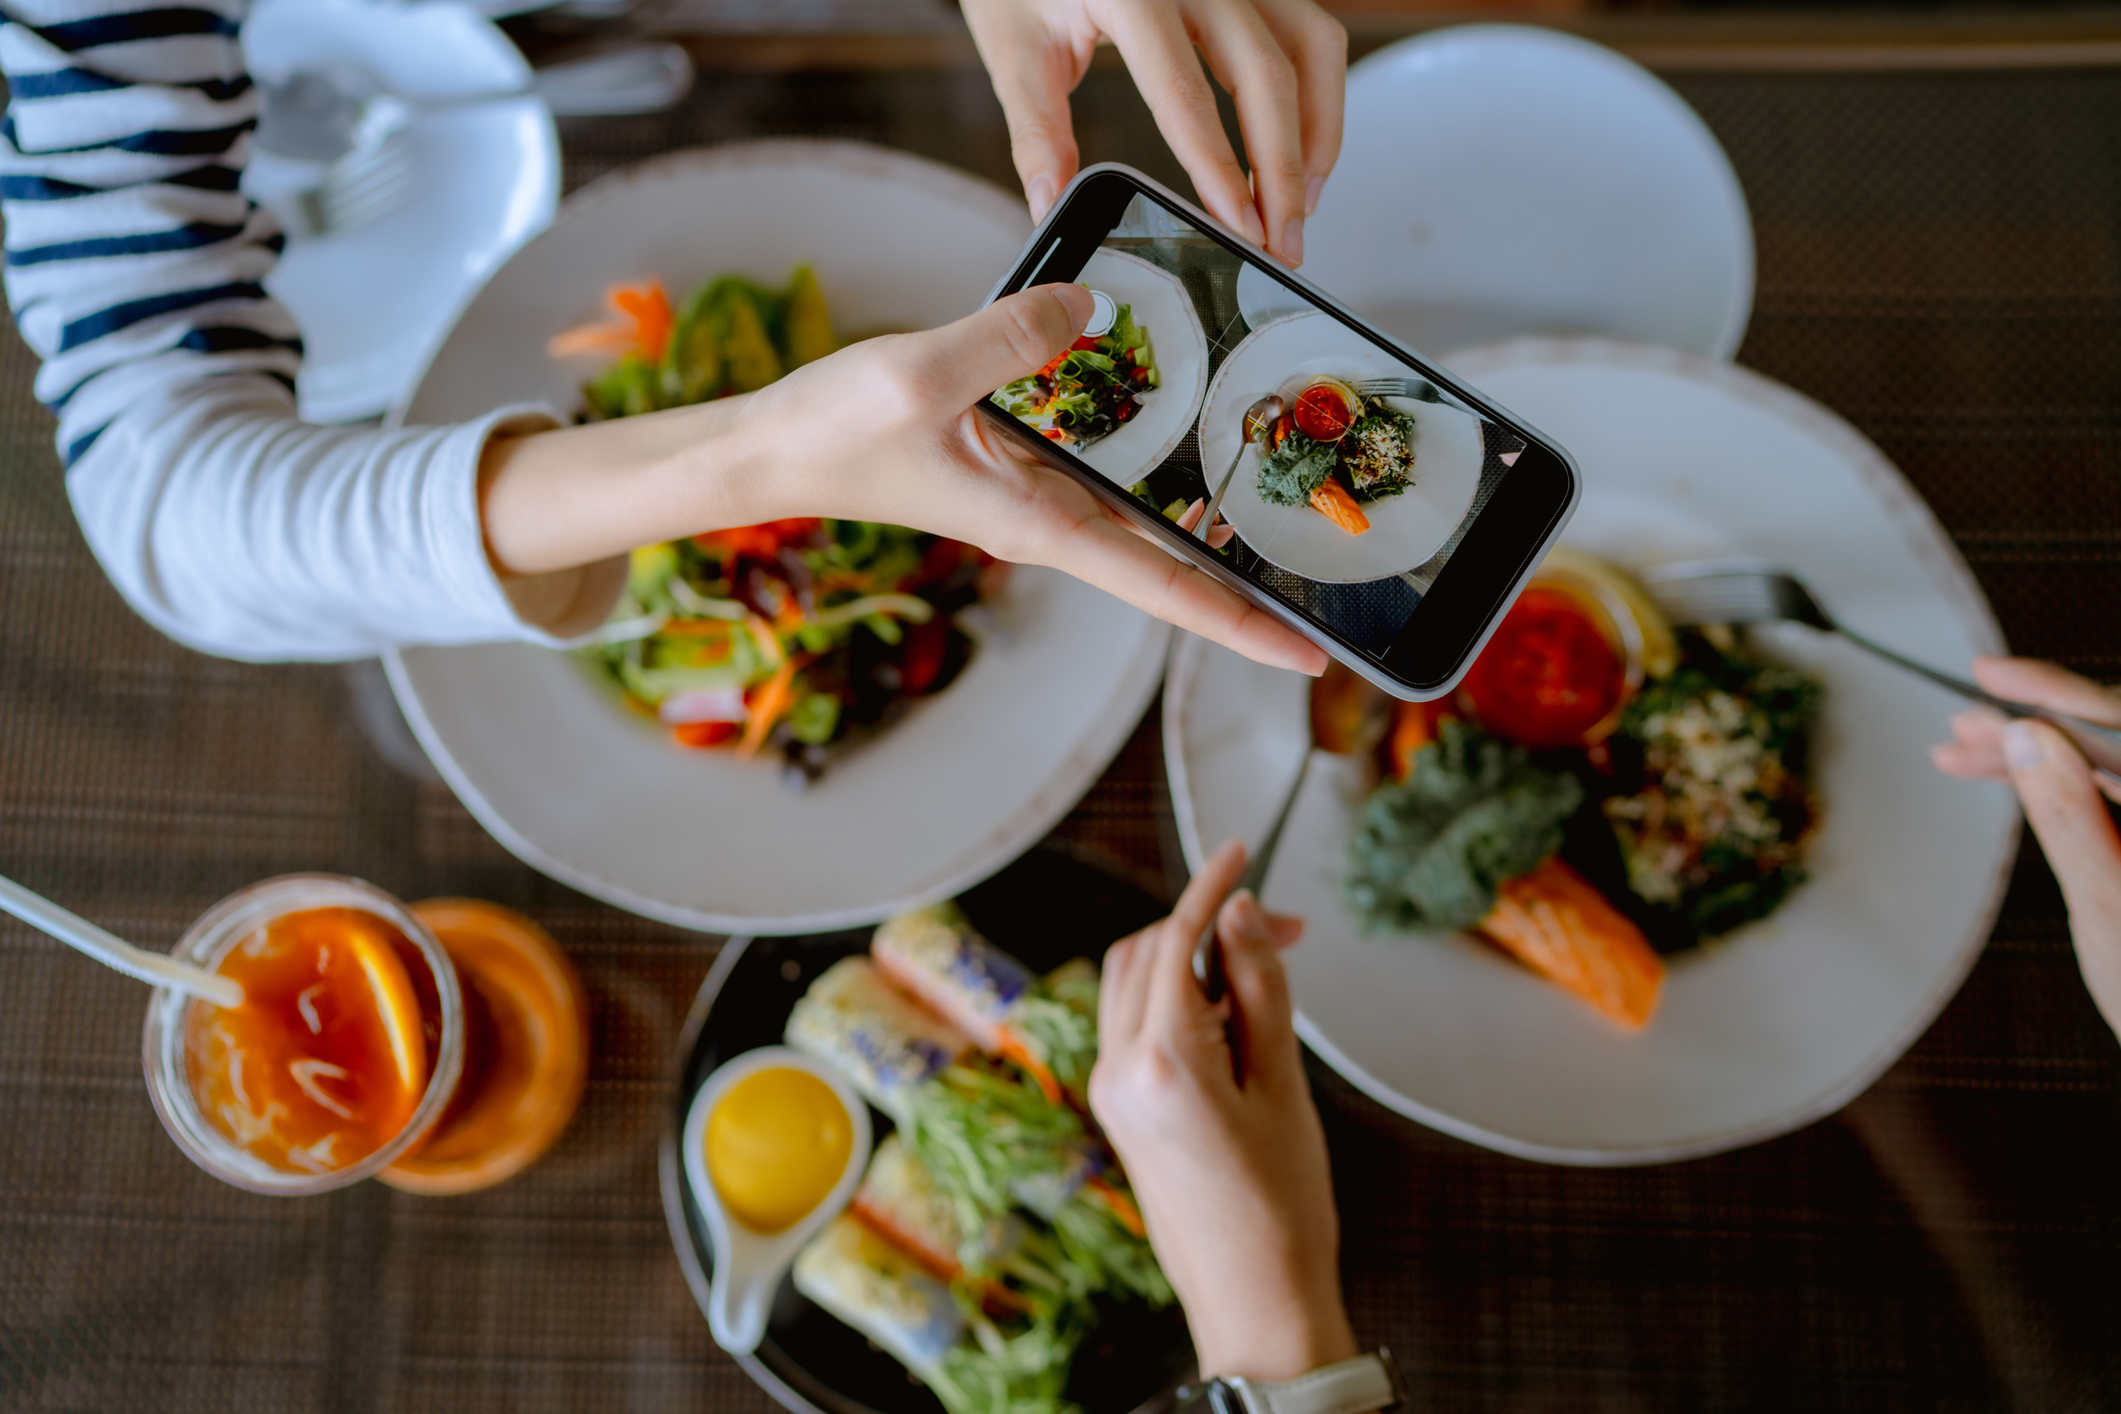 Person taking a photo of a plate of food with their smartphone